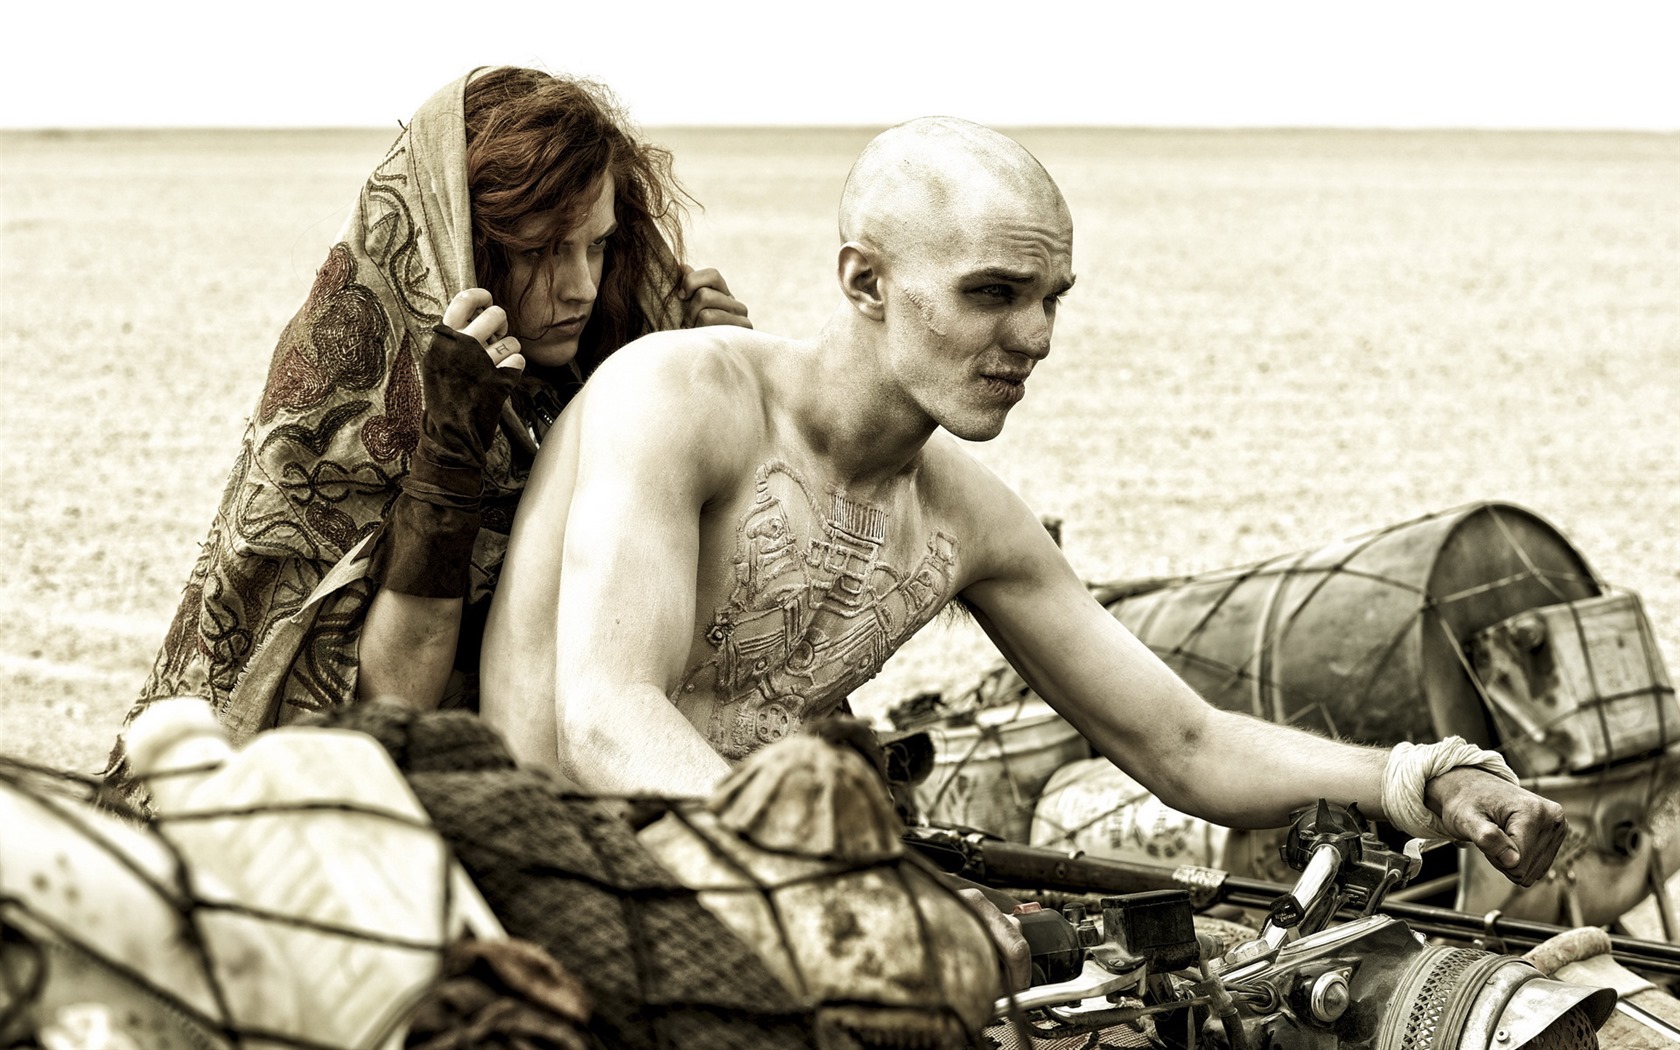 Mad Max: Fury Road, HD movie wallpapers #13 - 1680x1050